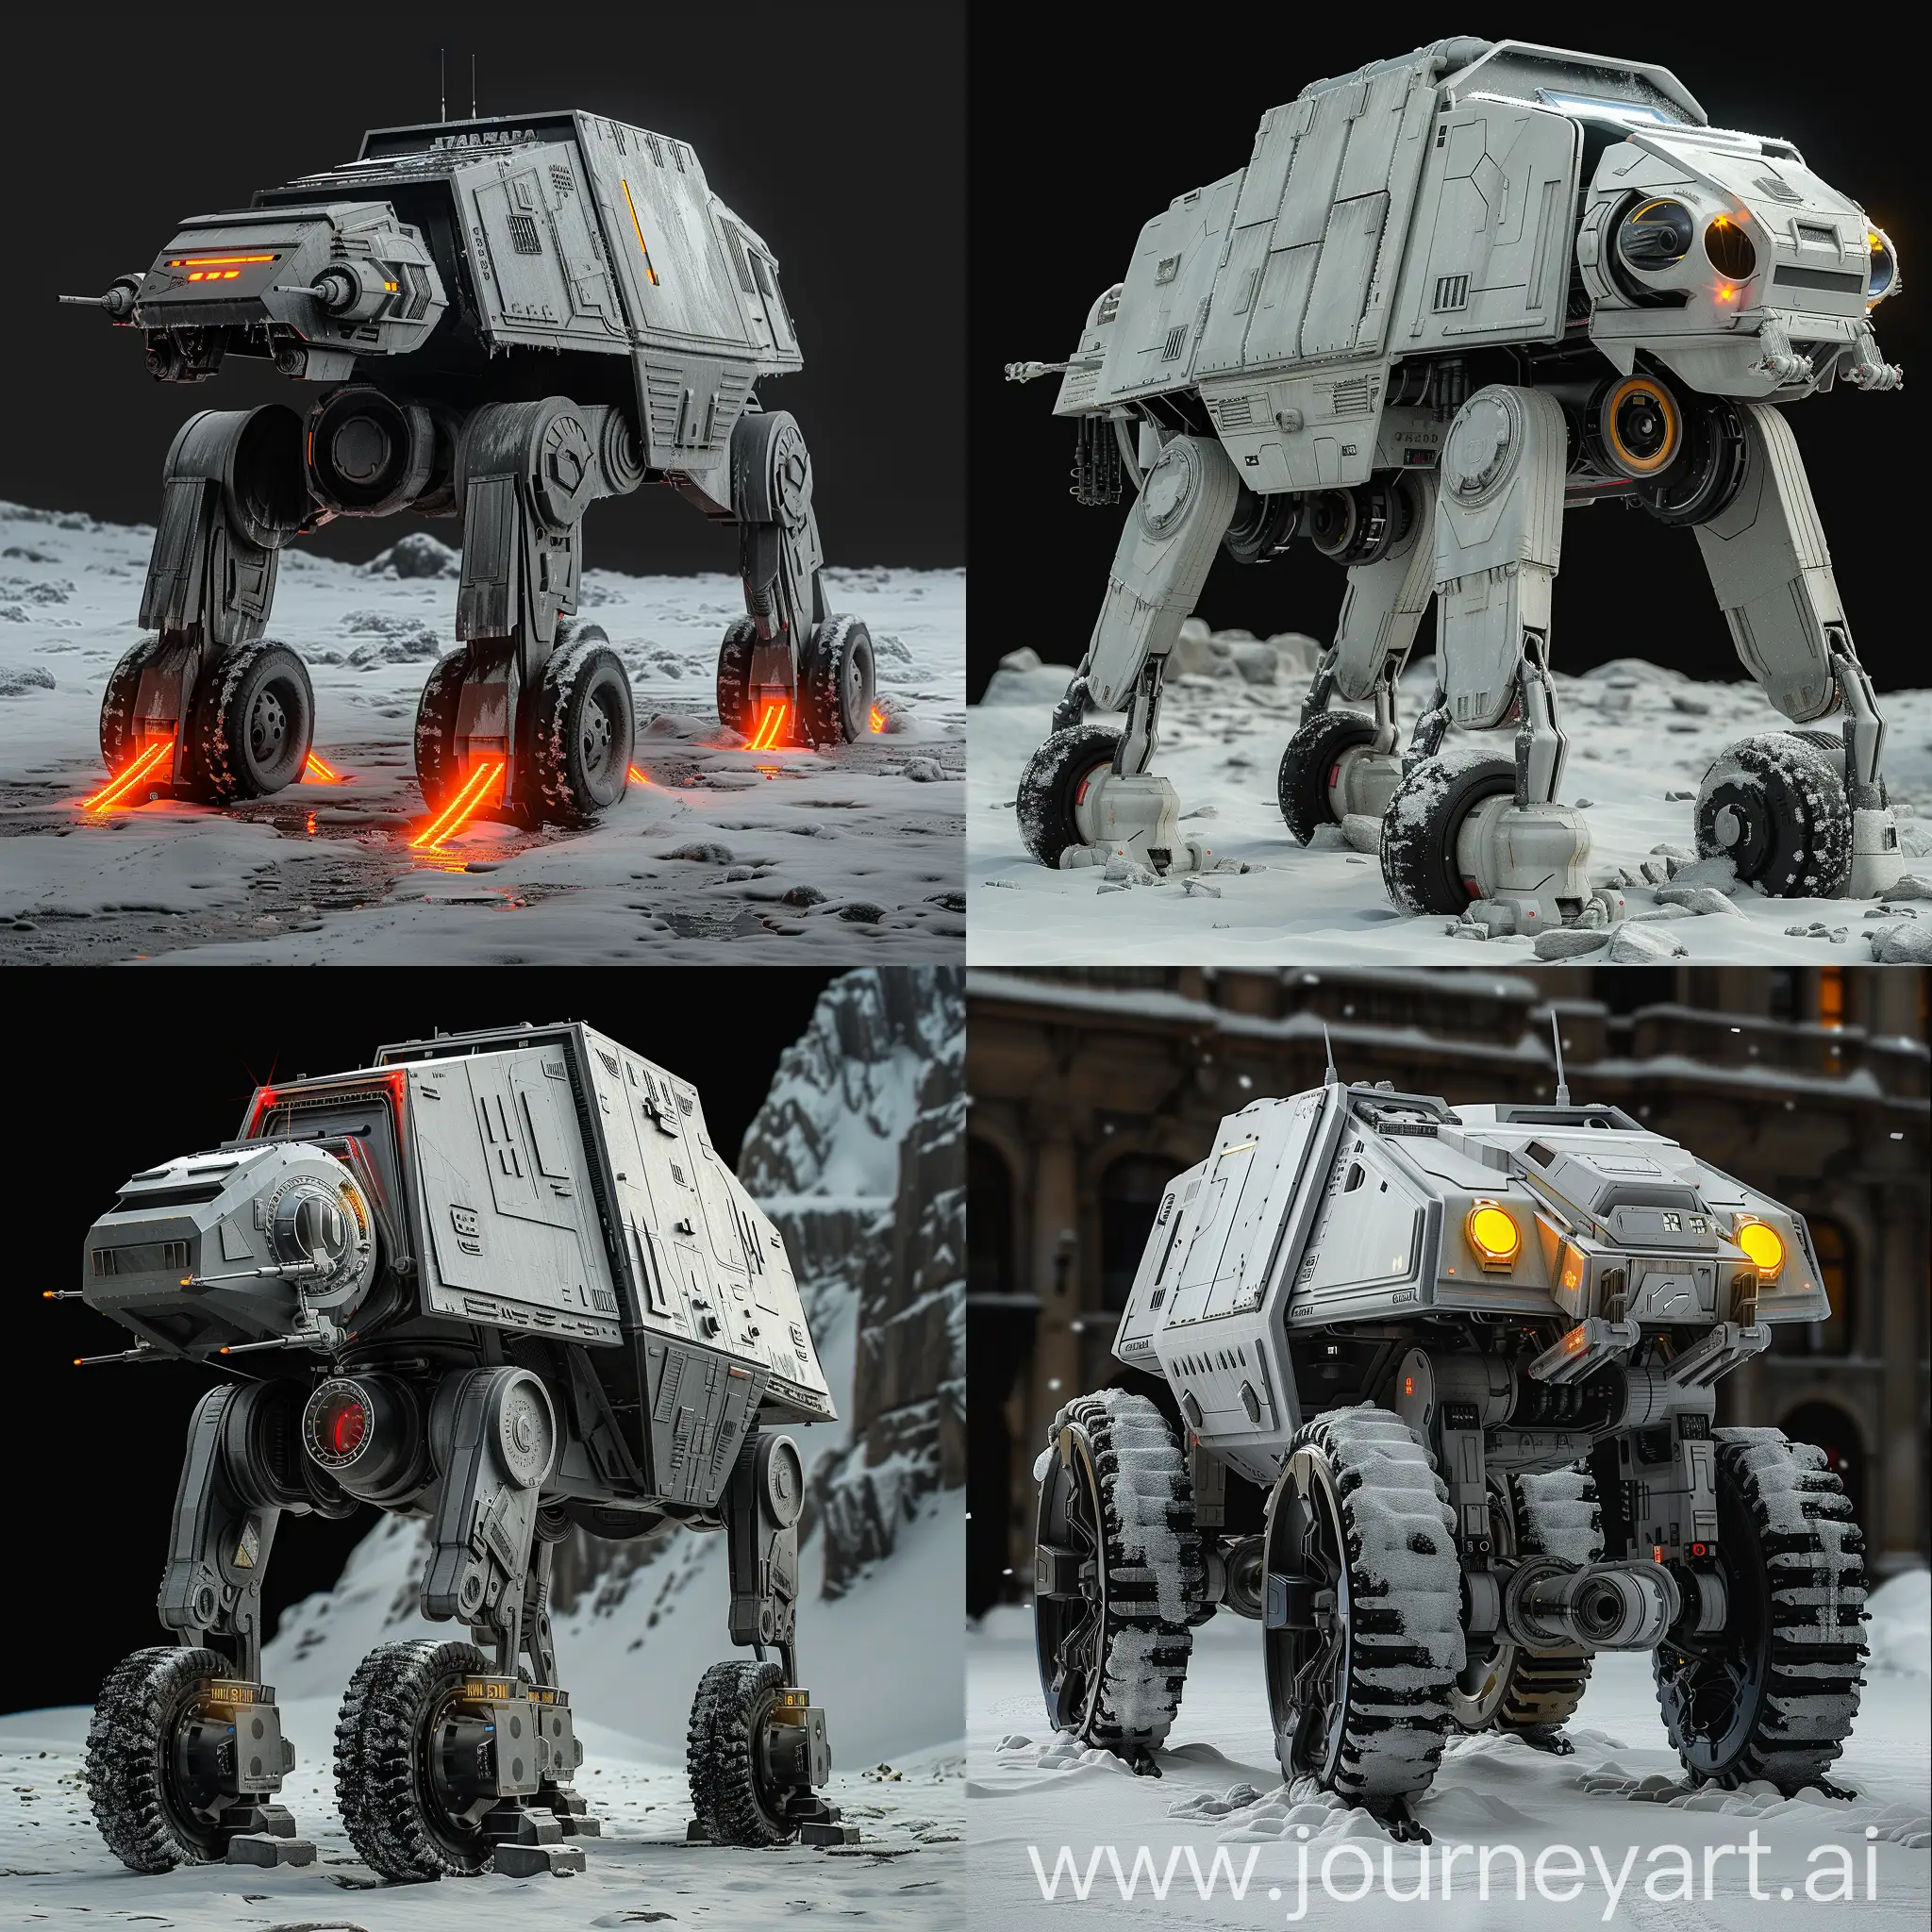 Futuristic-Star-Wars-All-Terrain-Armored-Transport-with-Nanotech-Upgrades